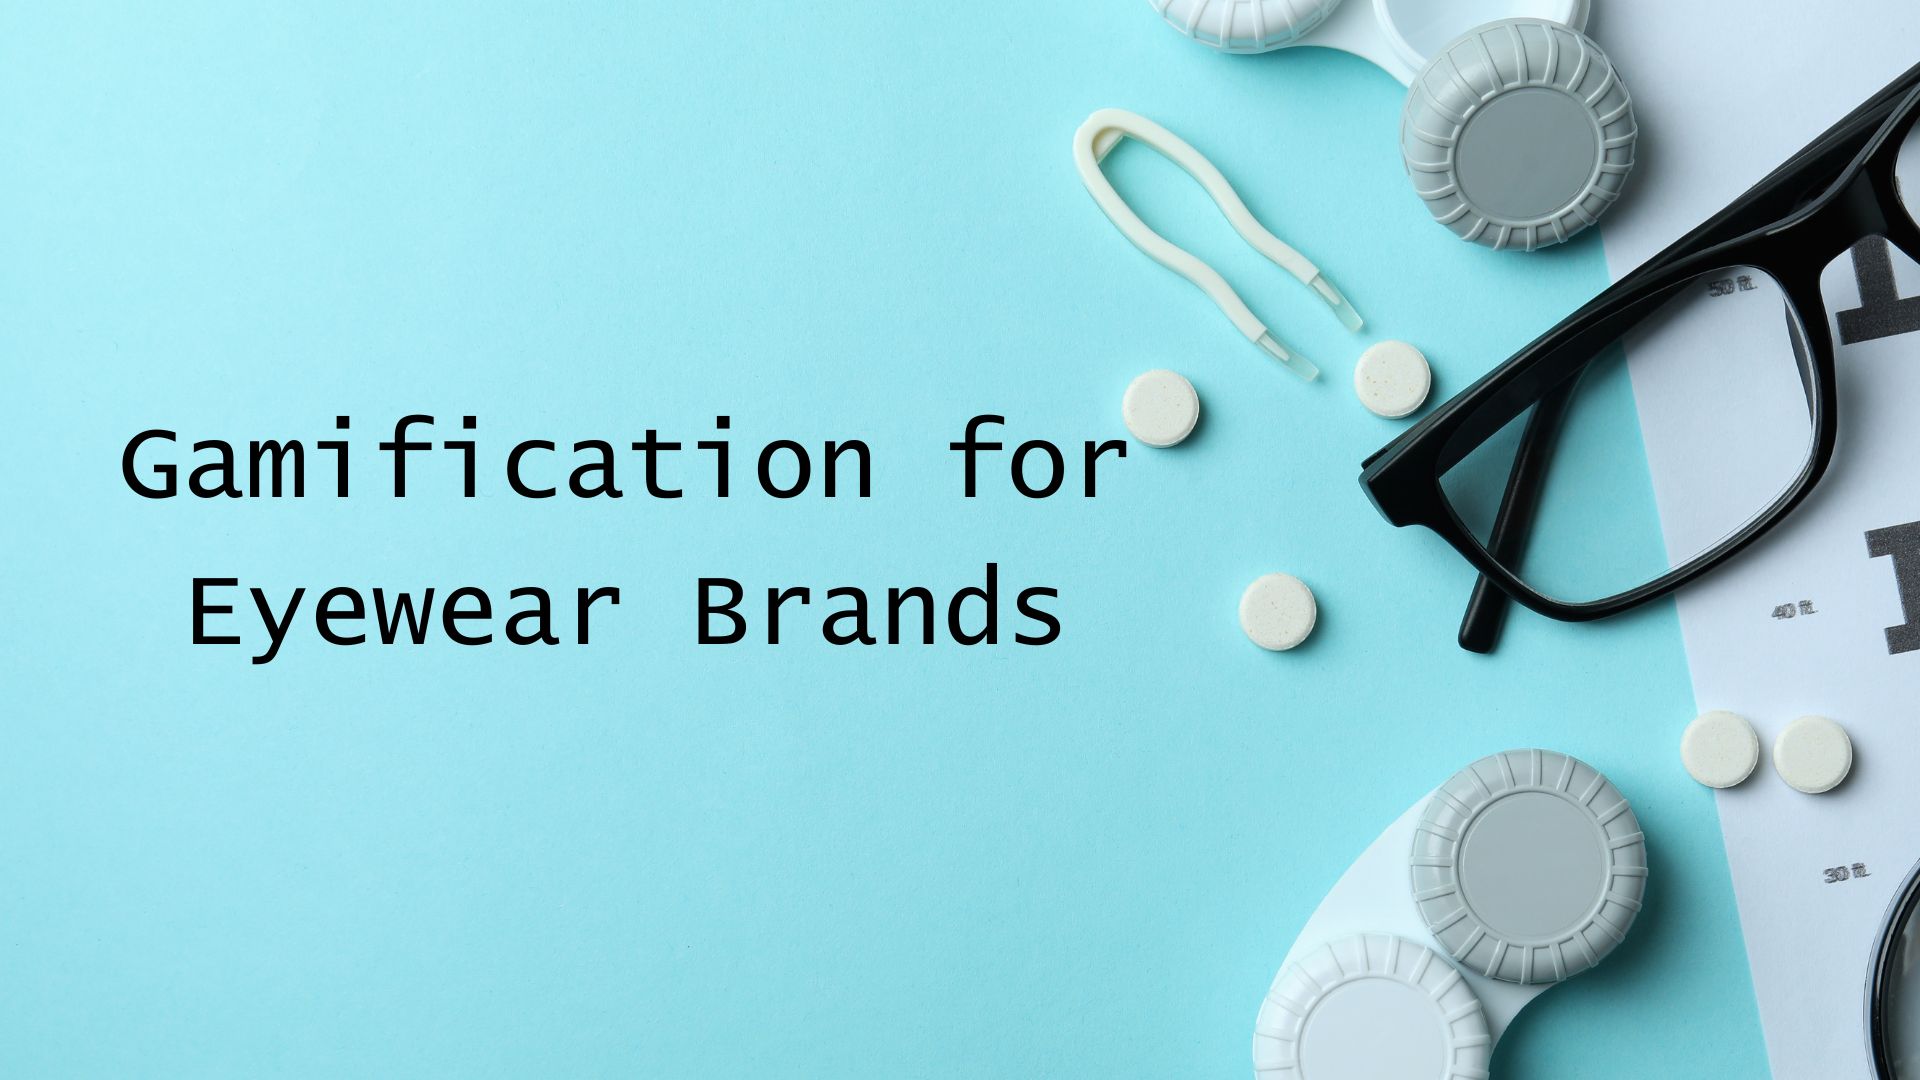 Gamification for Eyewear Brands